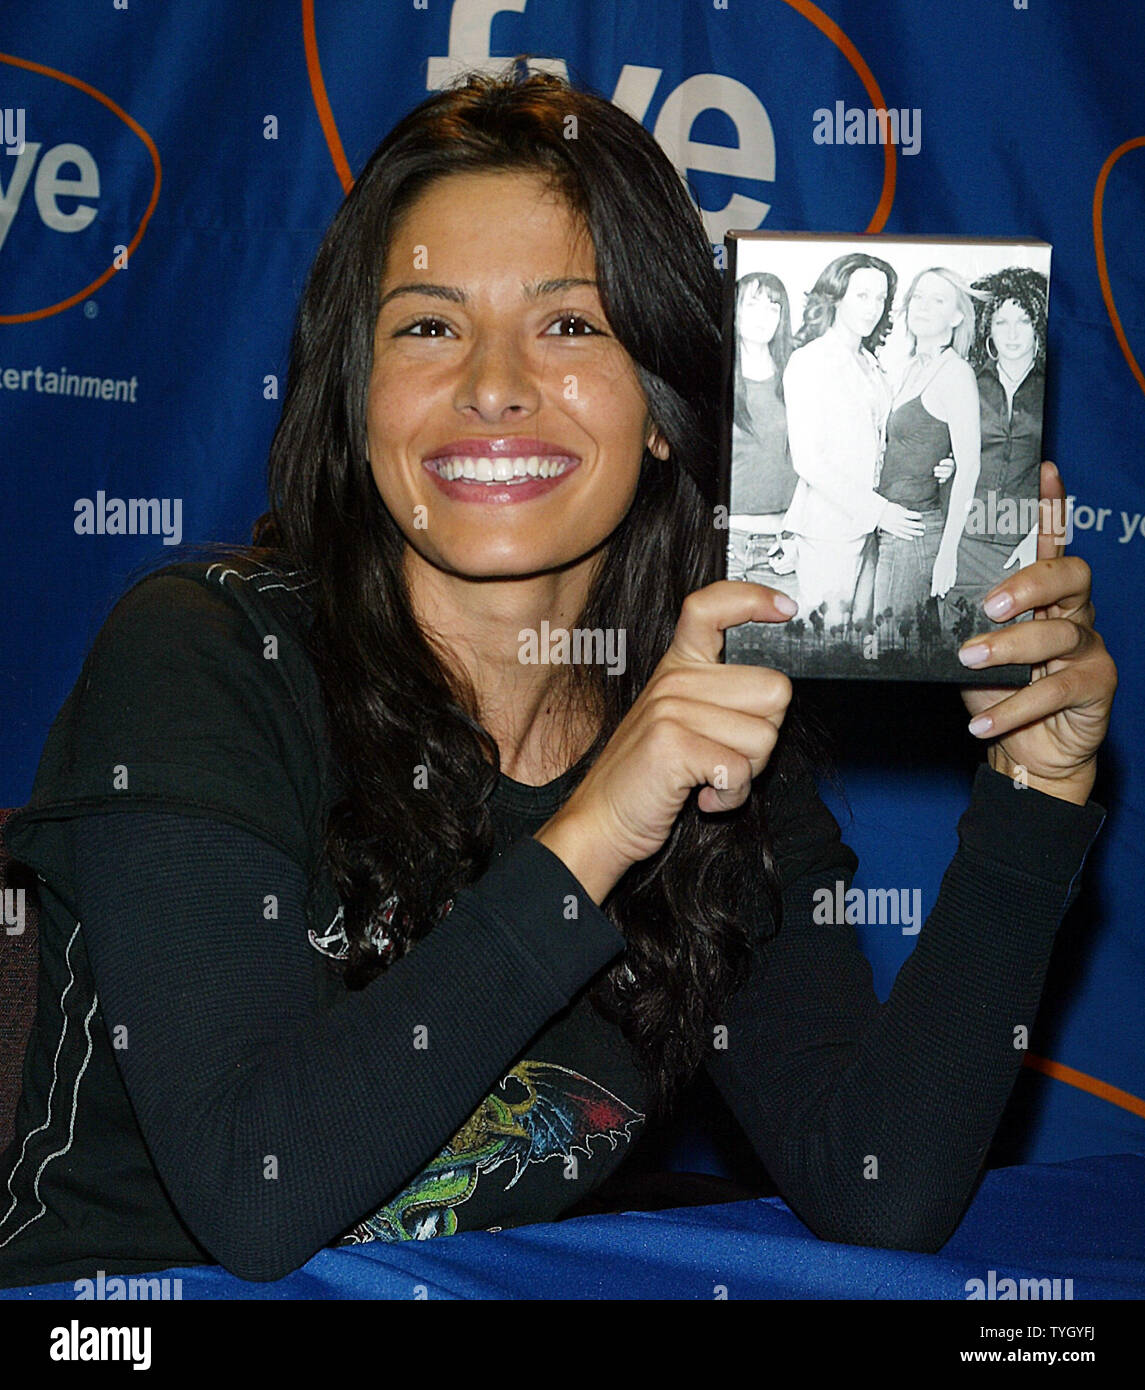 Cast Member Sarah Shahi Of The L Word Sign Copies Of The Shows First Season Dvd At Fye In New York On January 22 2005 Upi Photo Laura Cavanaugh Stock Photo Alamy